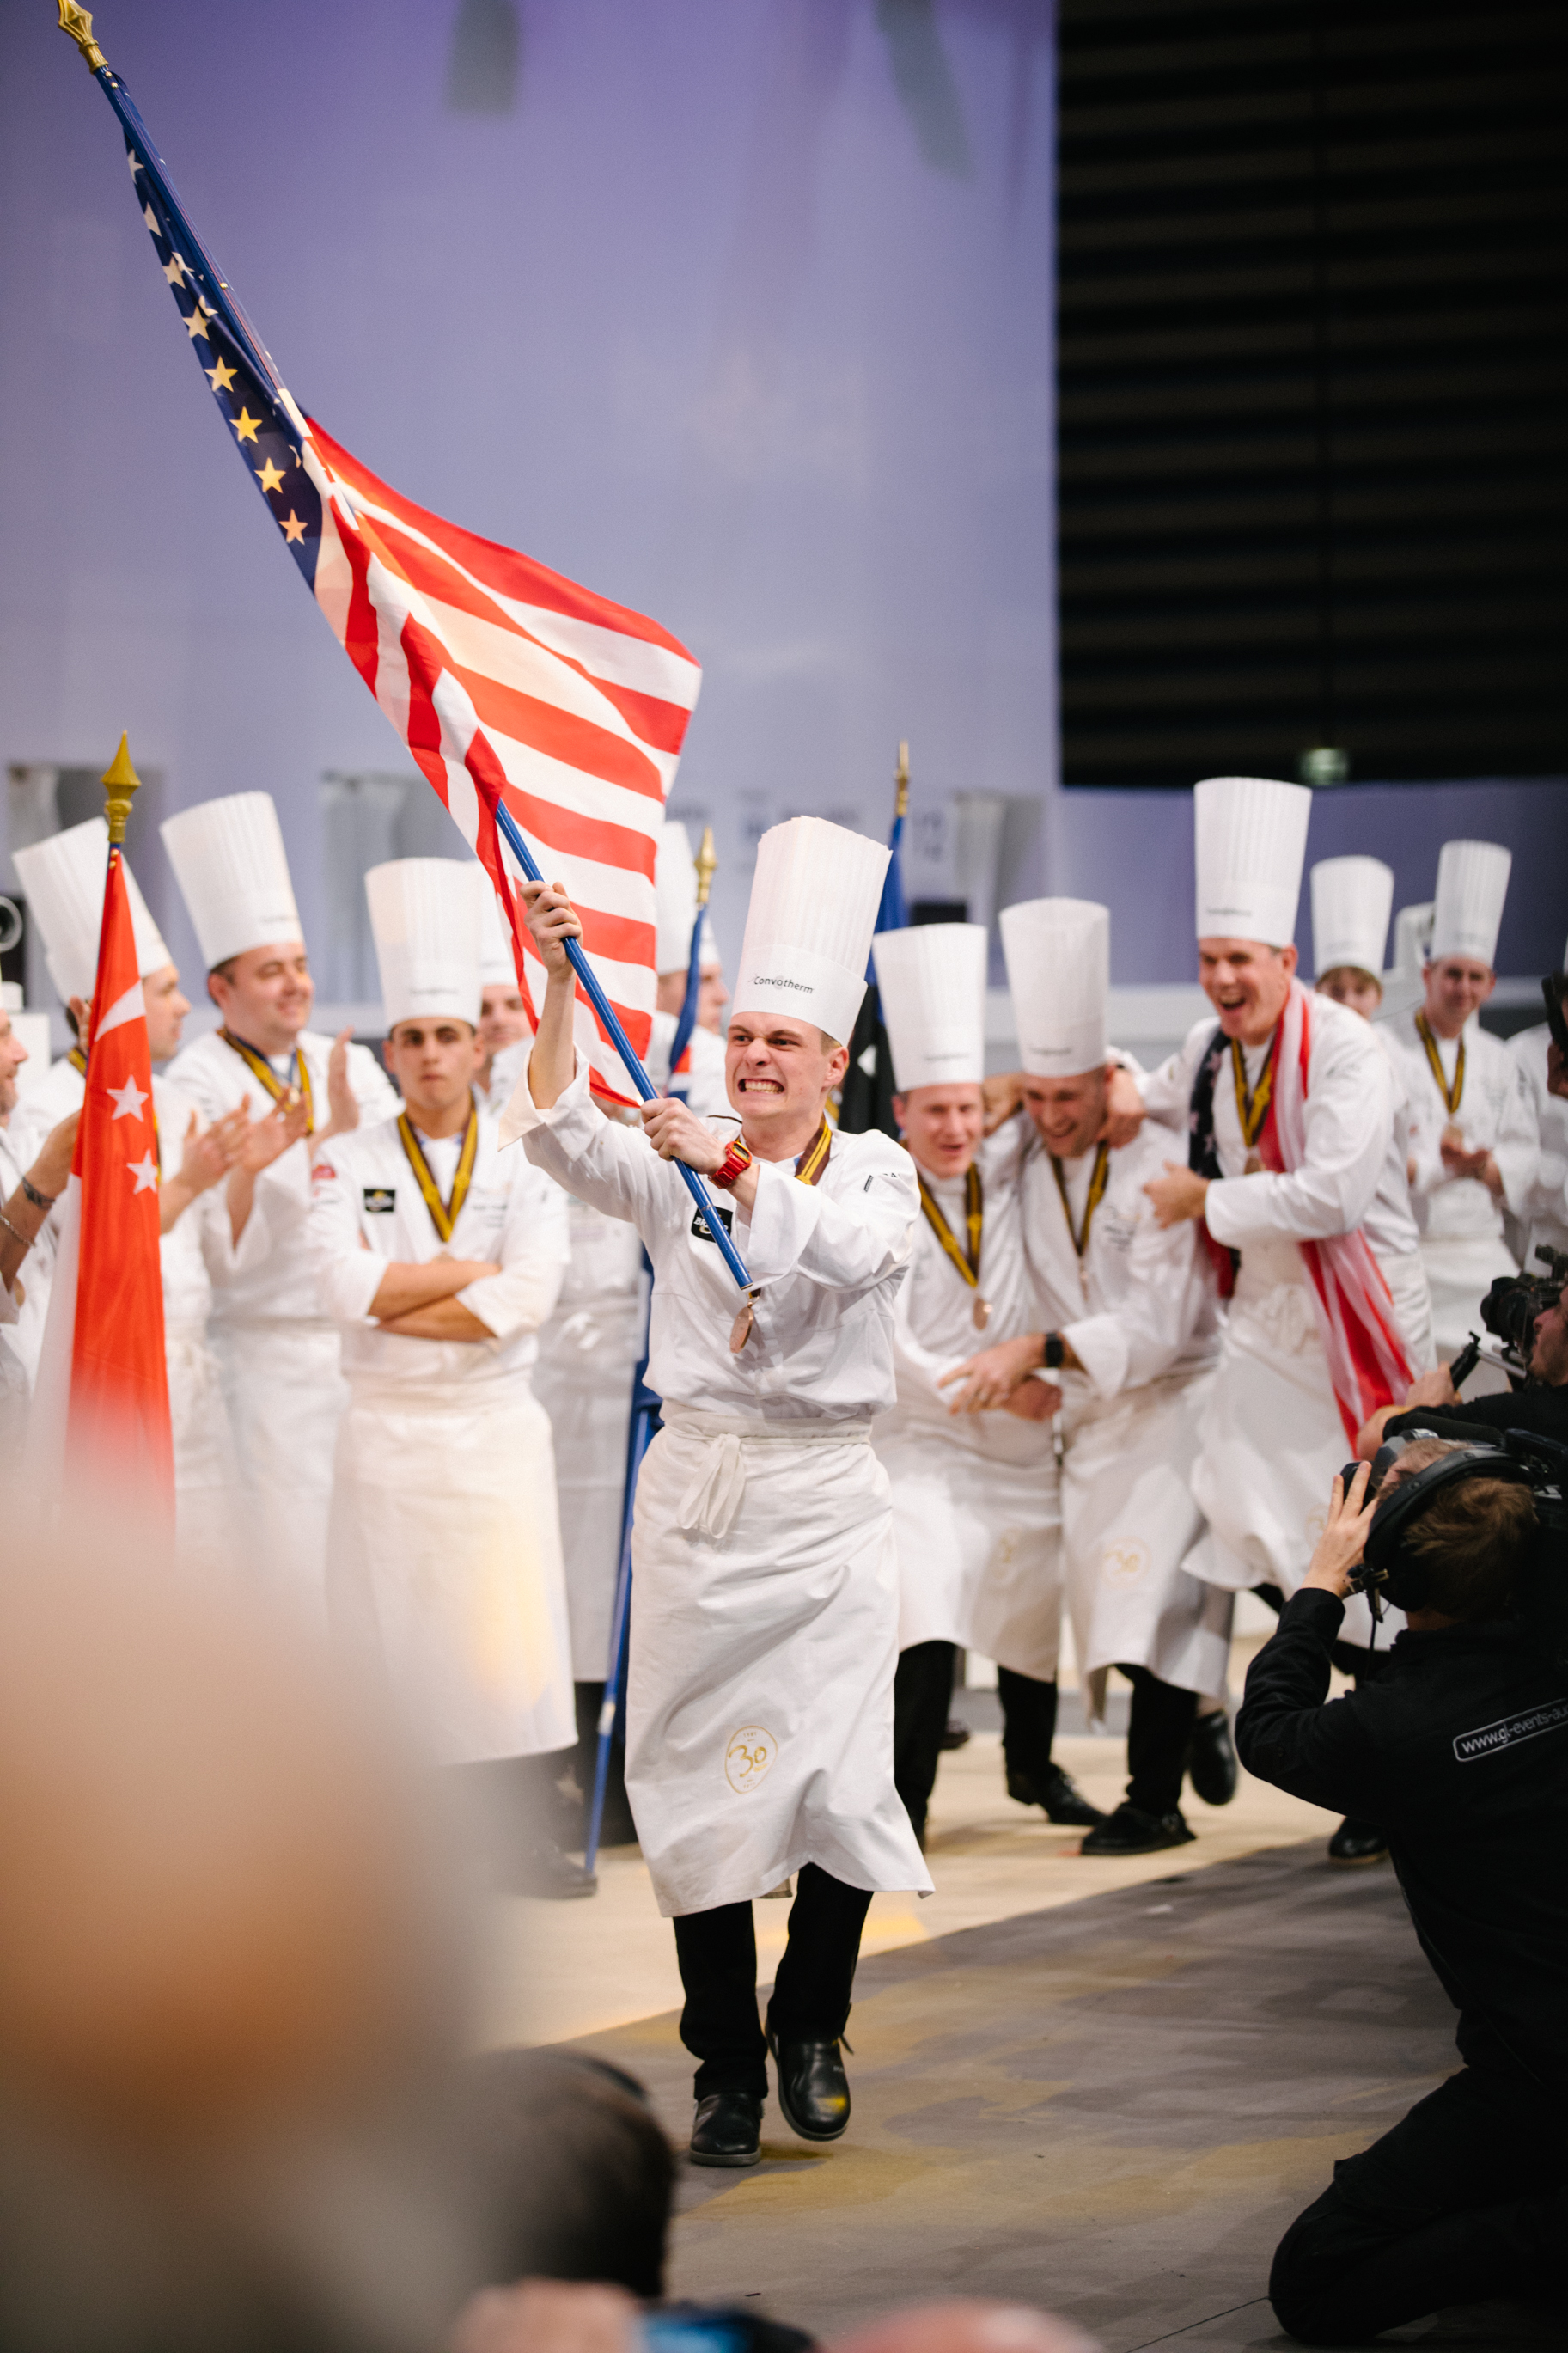 Team USA Commis Harrison Turone carries the American flag after his team was announced as the winner of the 2017 Bocuse d'Or. (c) SIRHA 2017